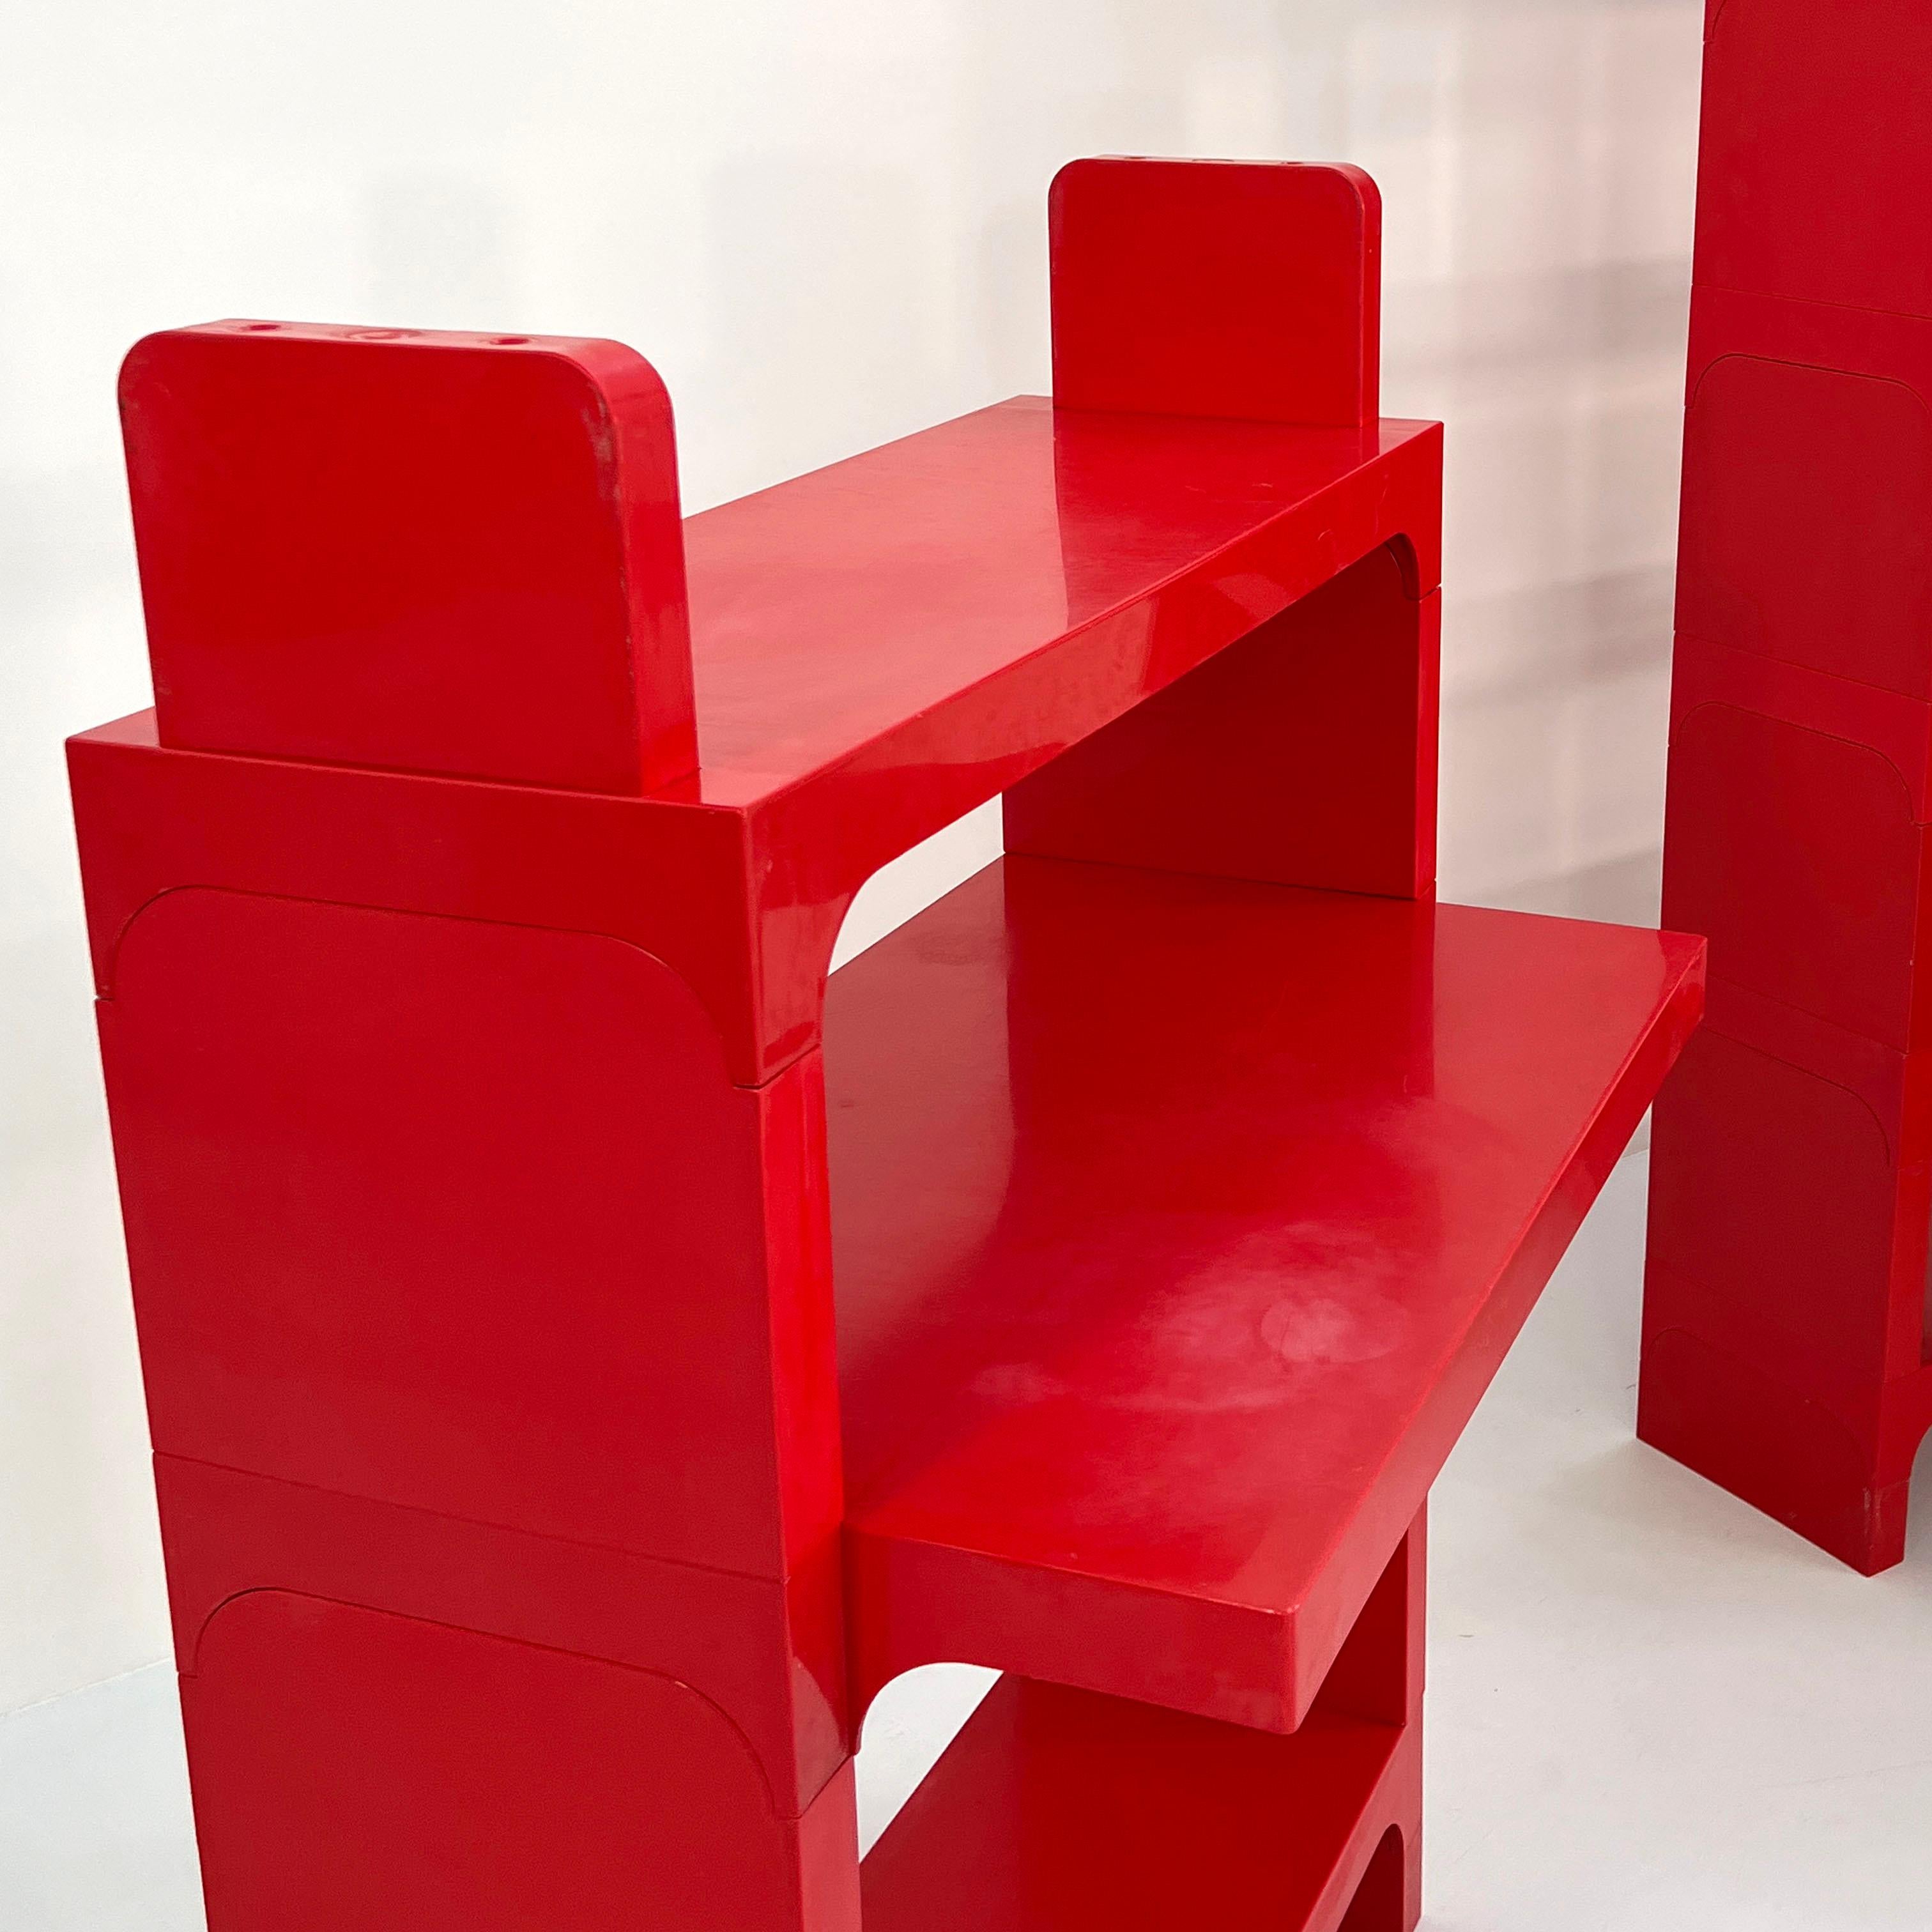 Late 20th Century Red Modular Shelf with Desk by Olaf von Bohr for Kartell, 1970s